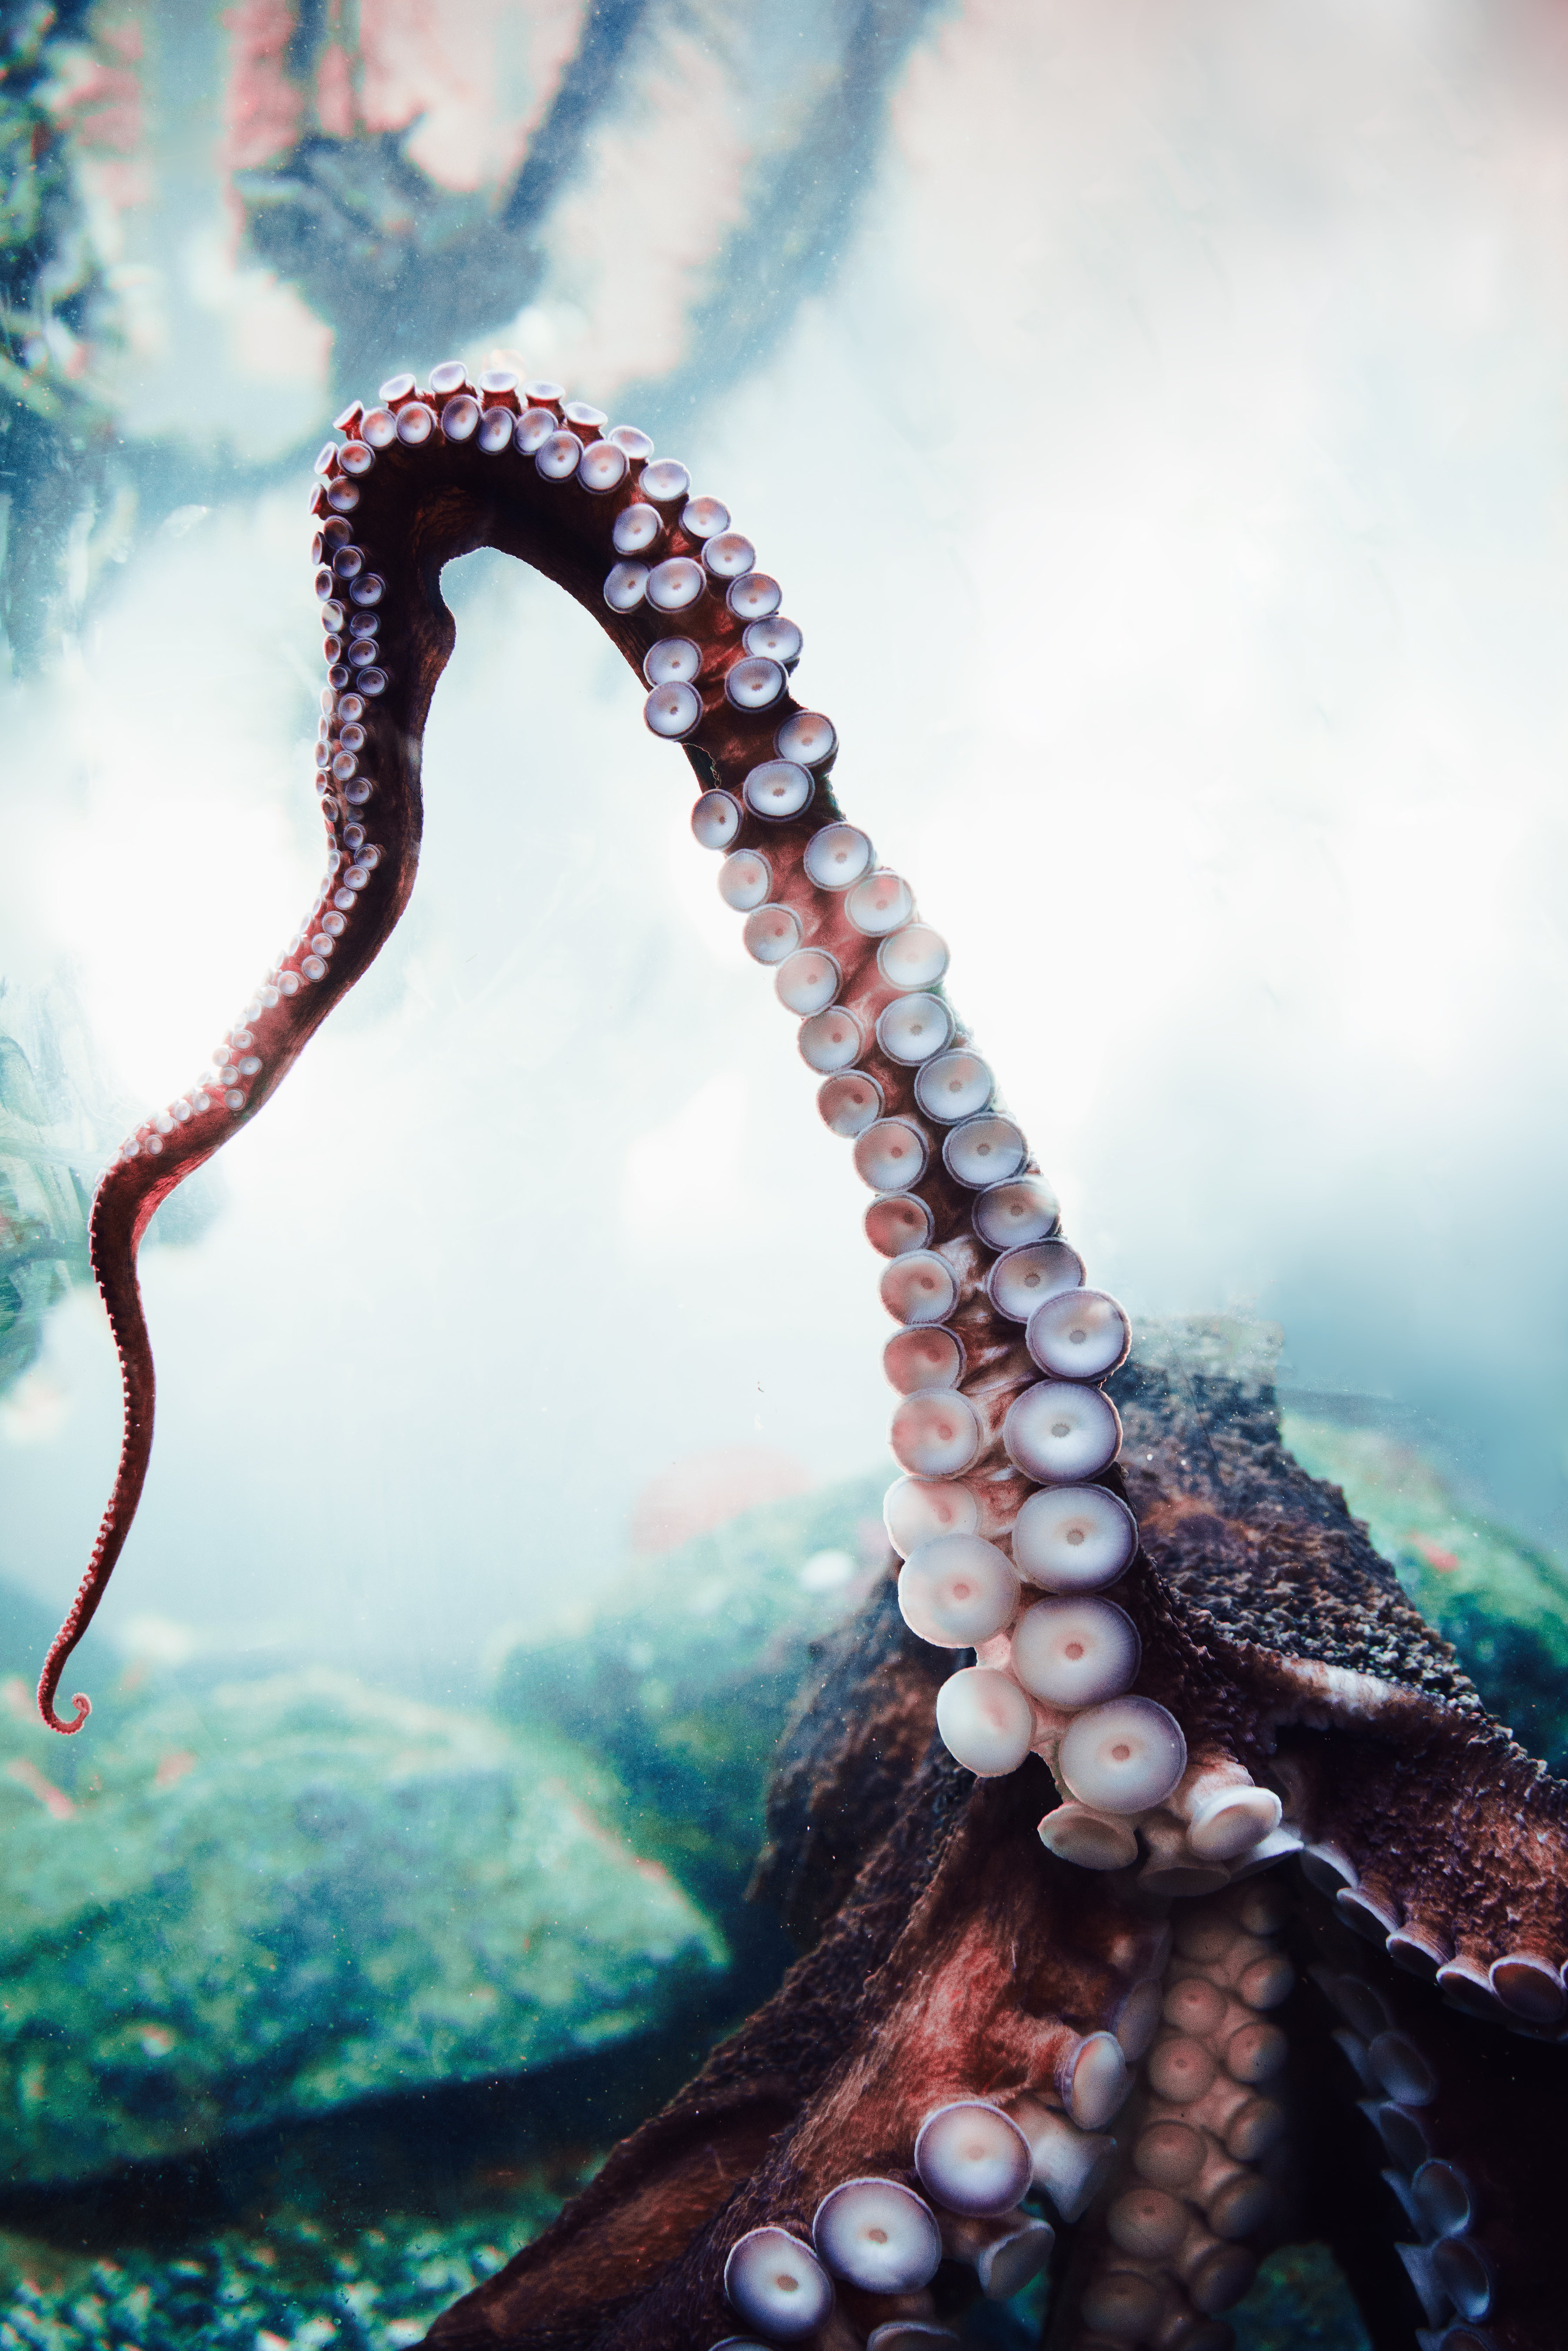 giant octopus photography